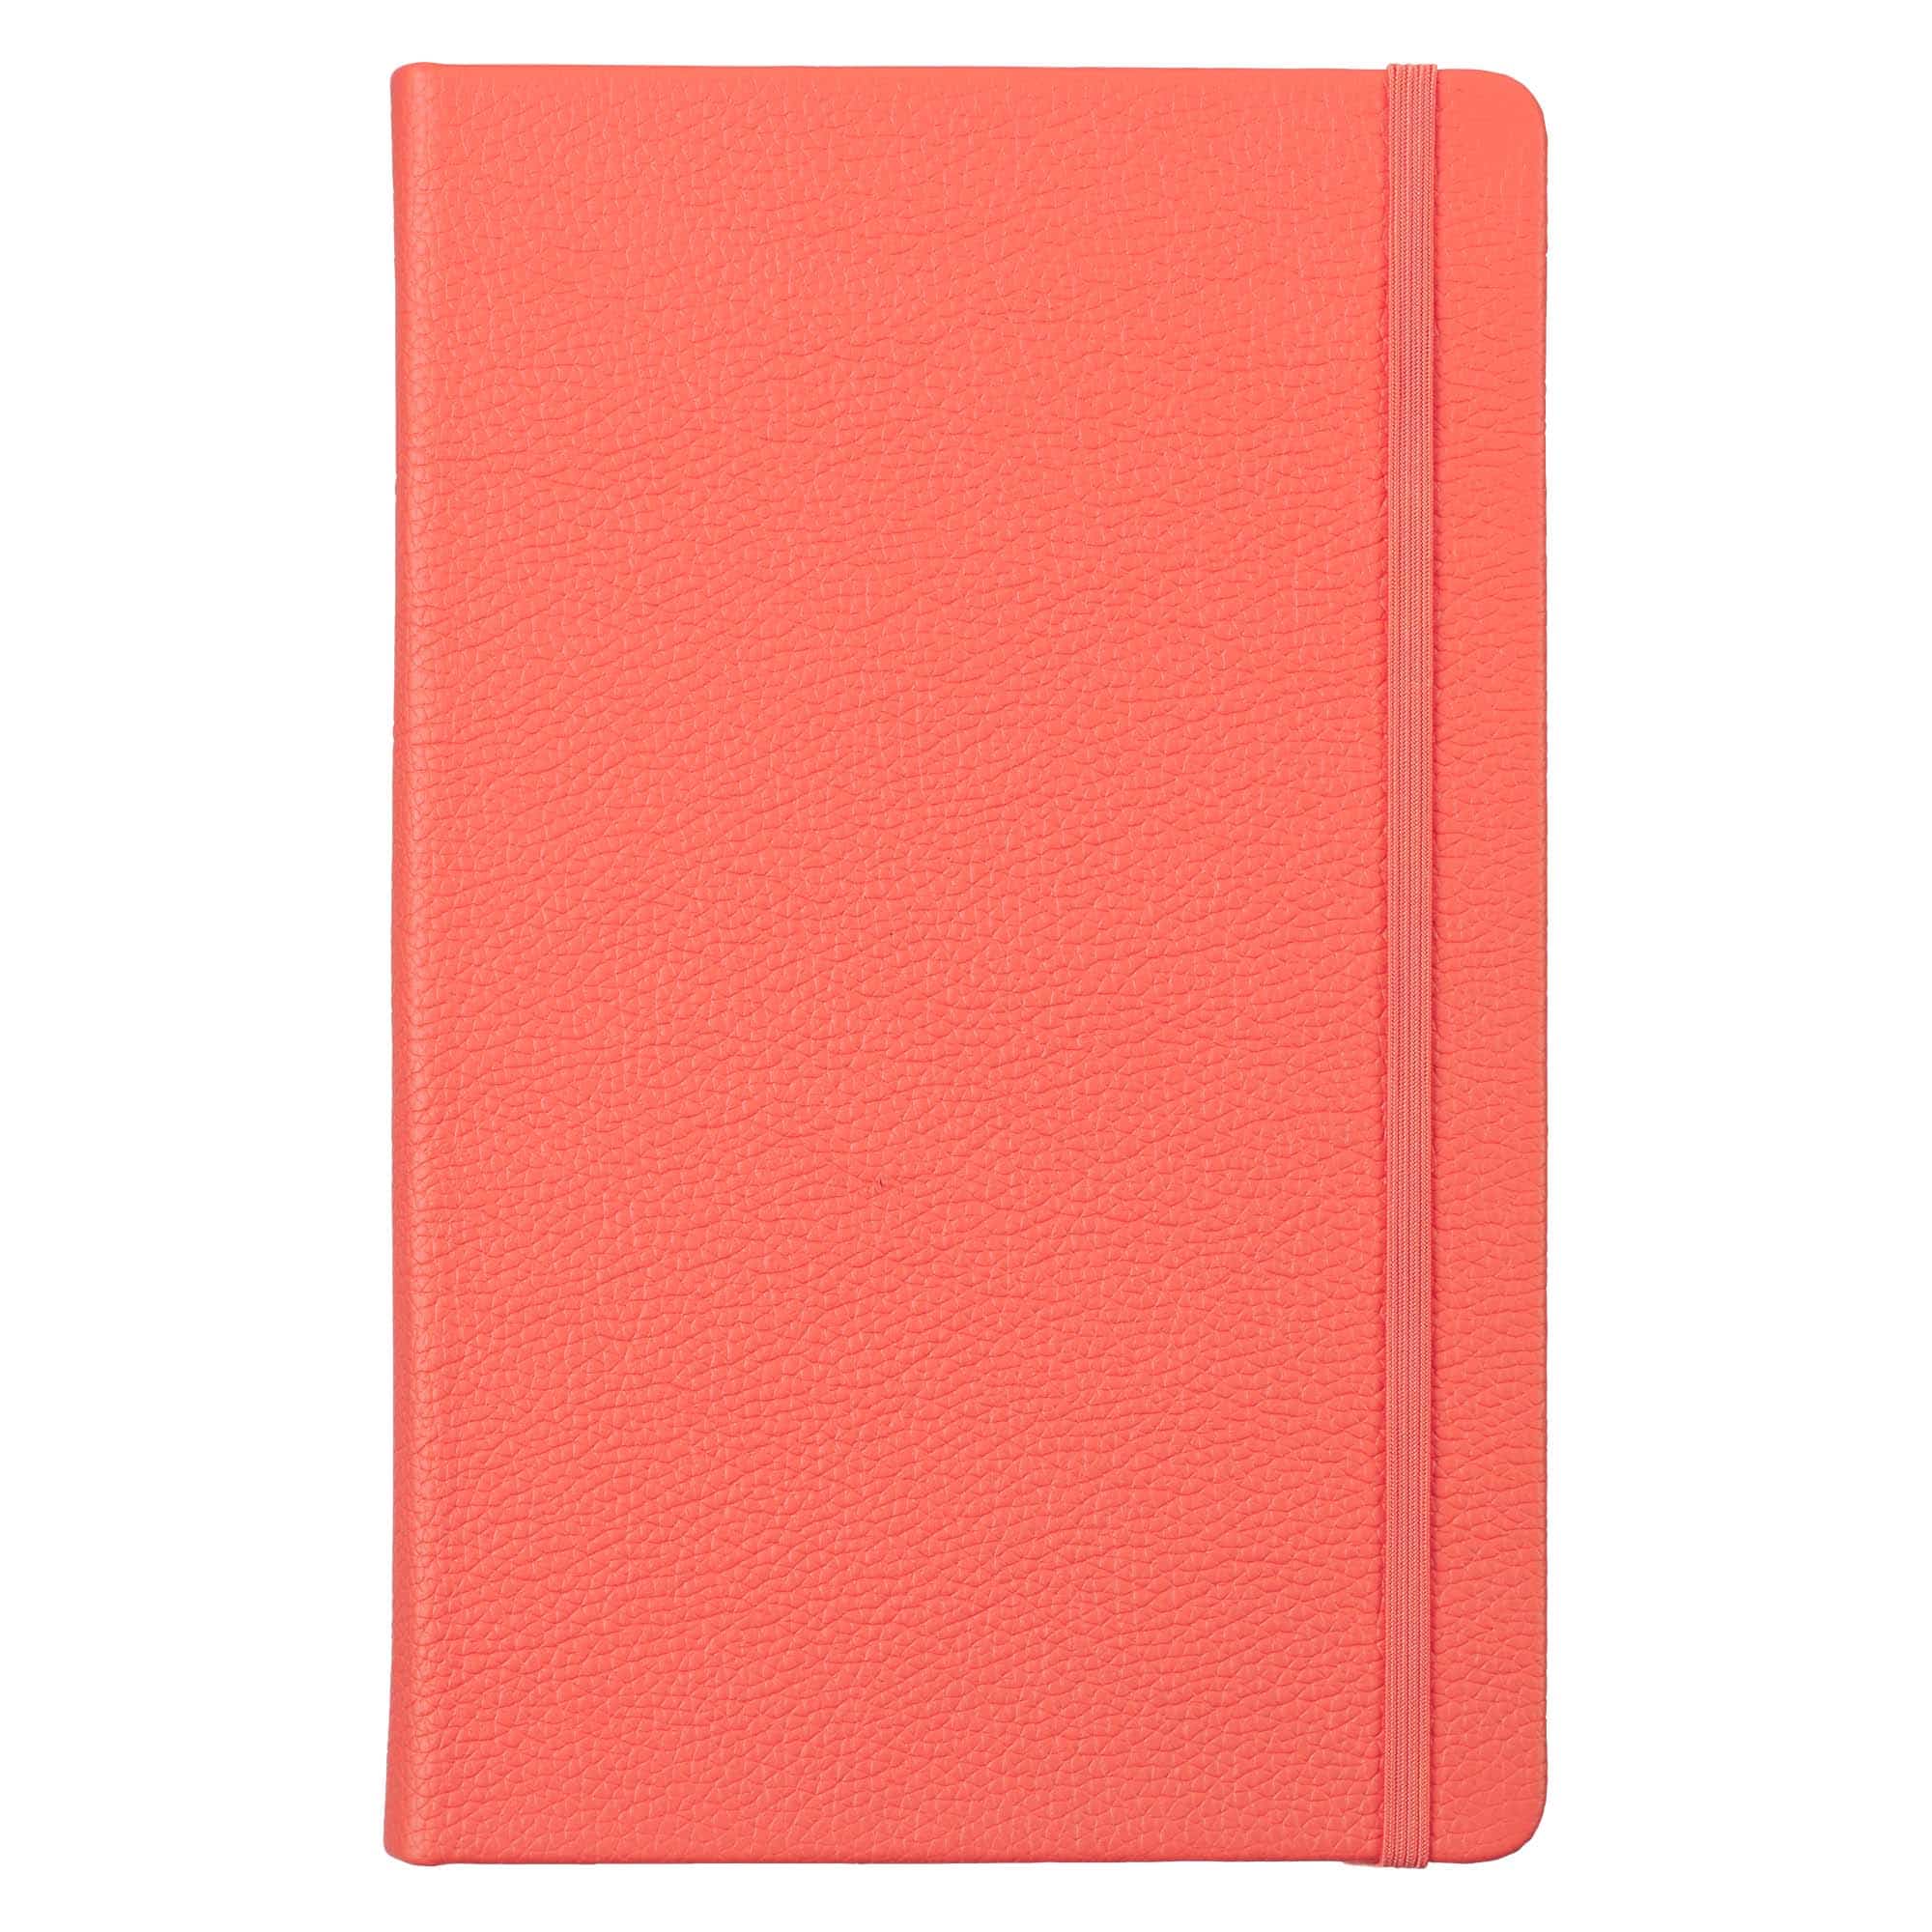 Coral Red Leather Notebook